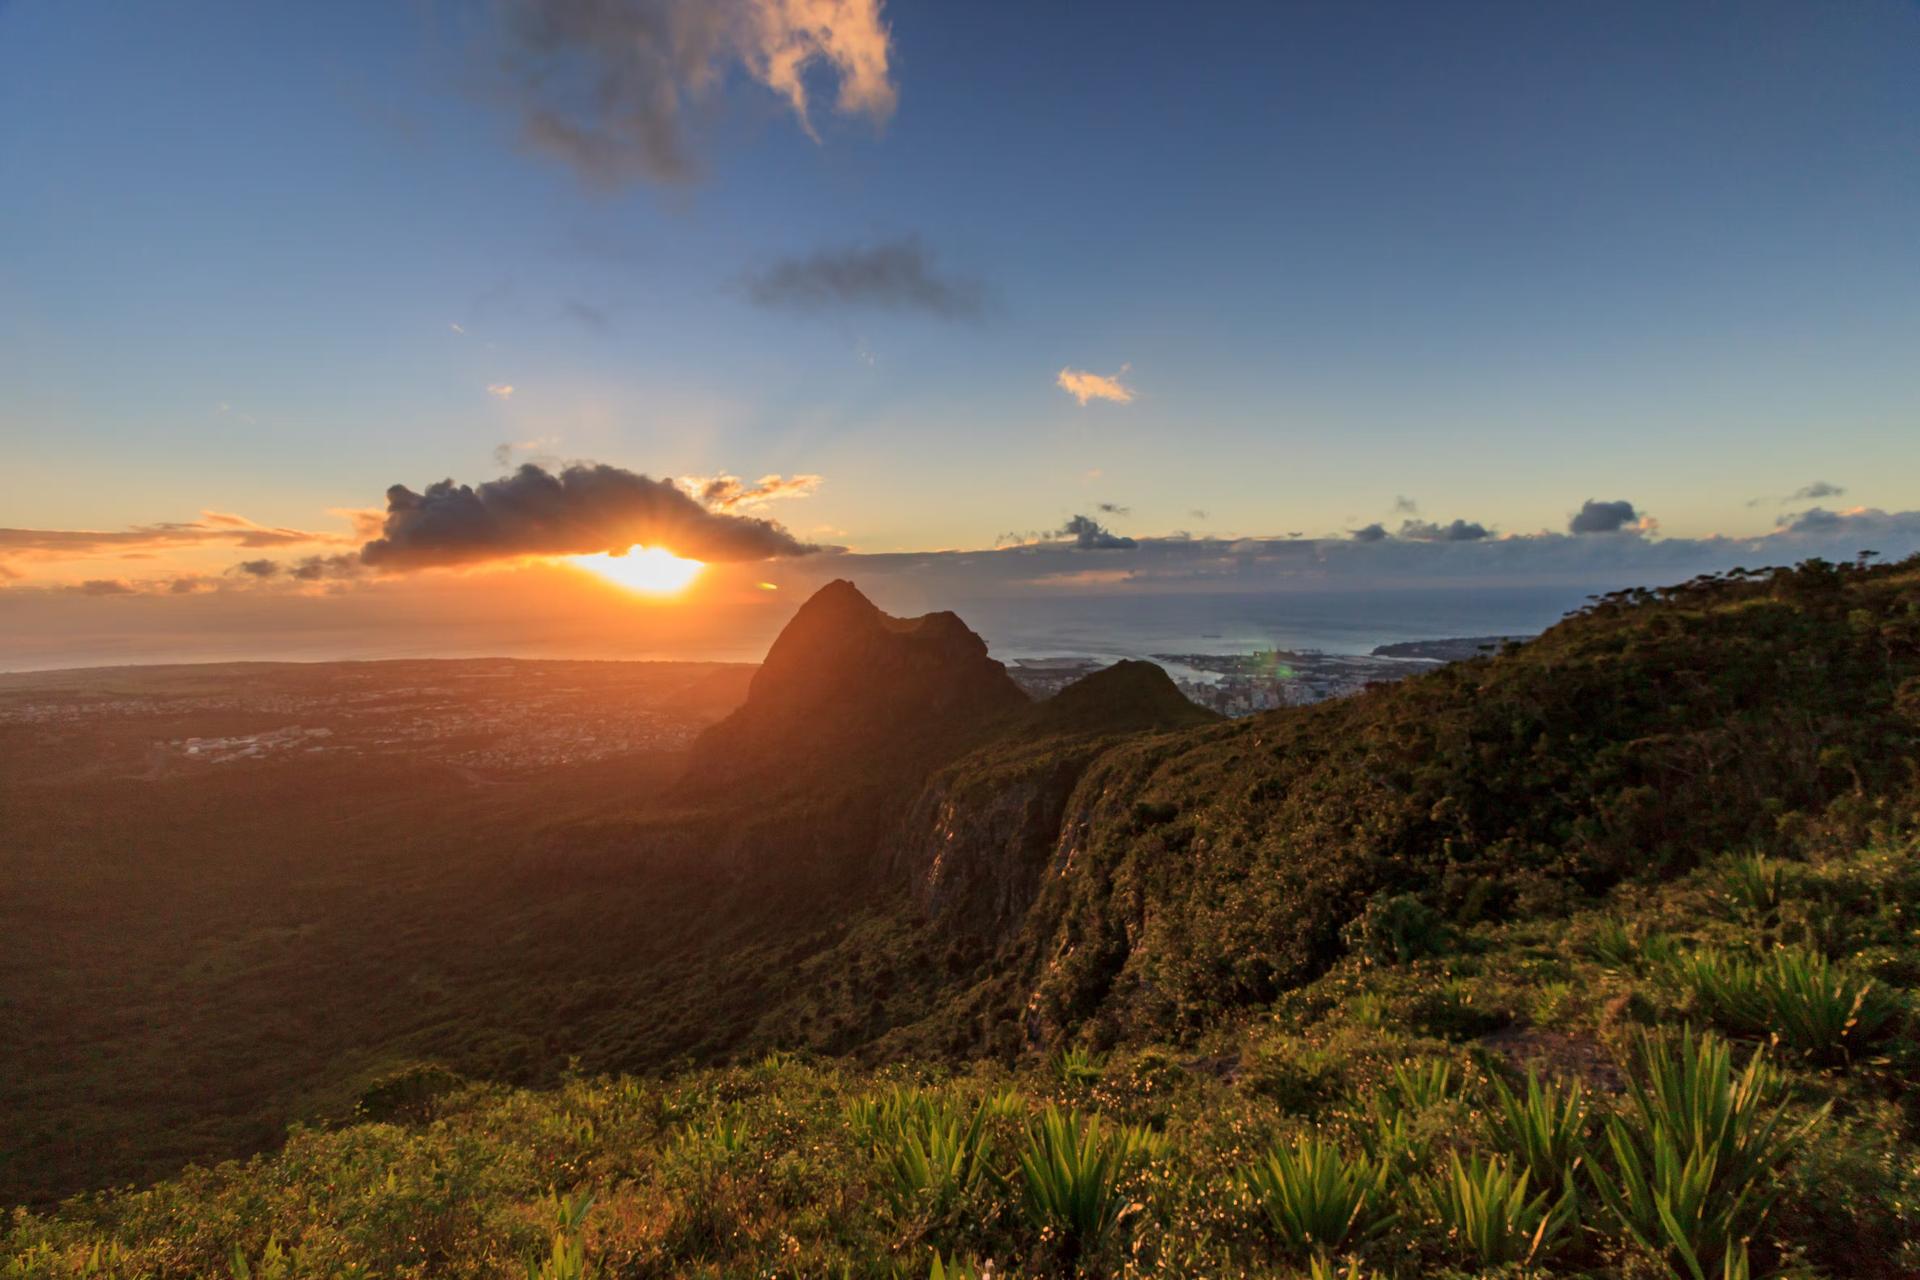 Scenic views from Le Pouce on Mauritius. While not very high, the mountains generally offer breathtaking views of the surrounding Island